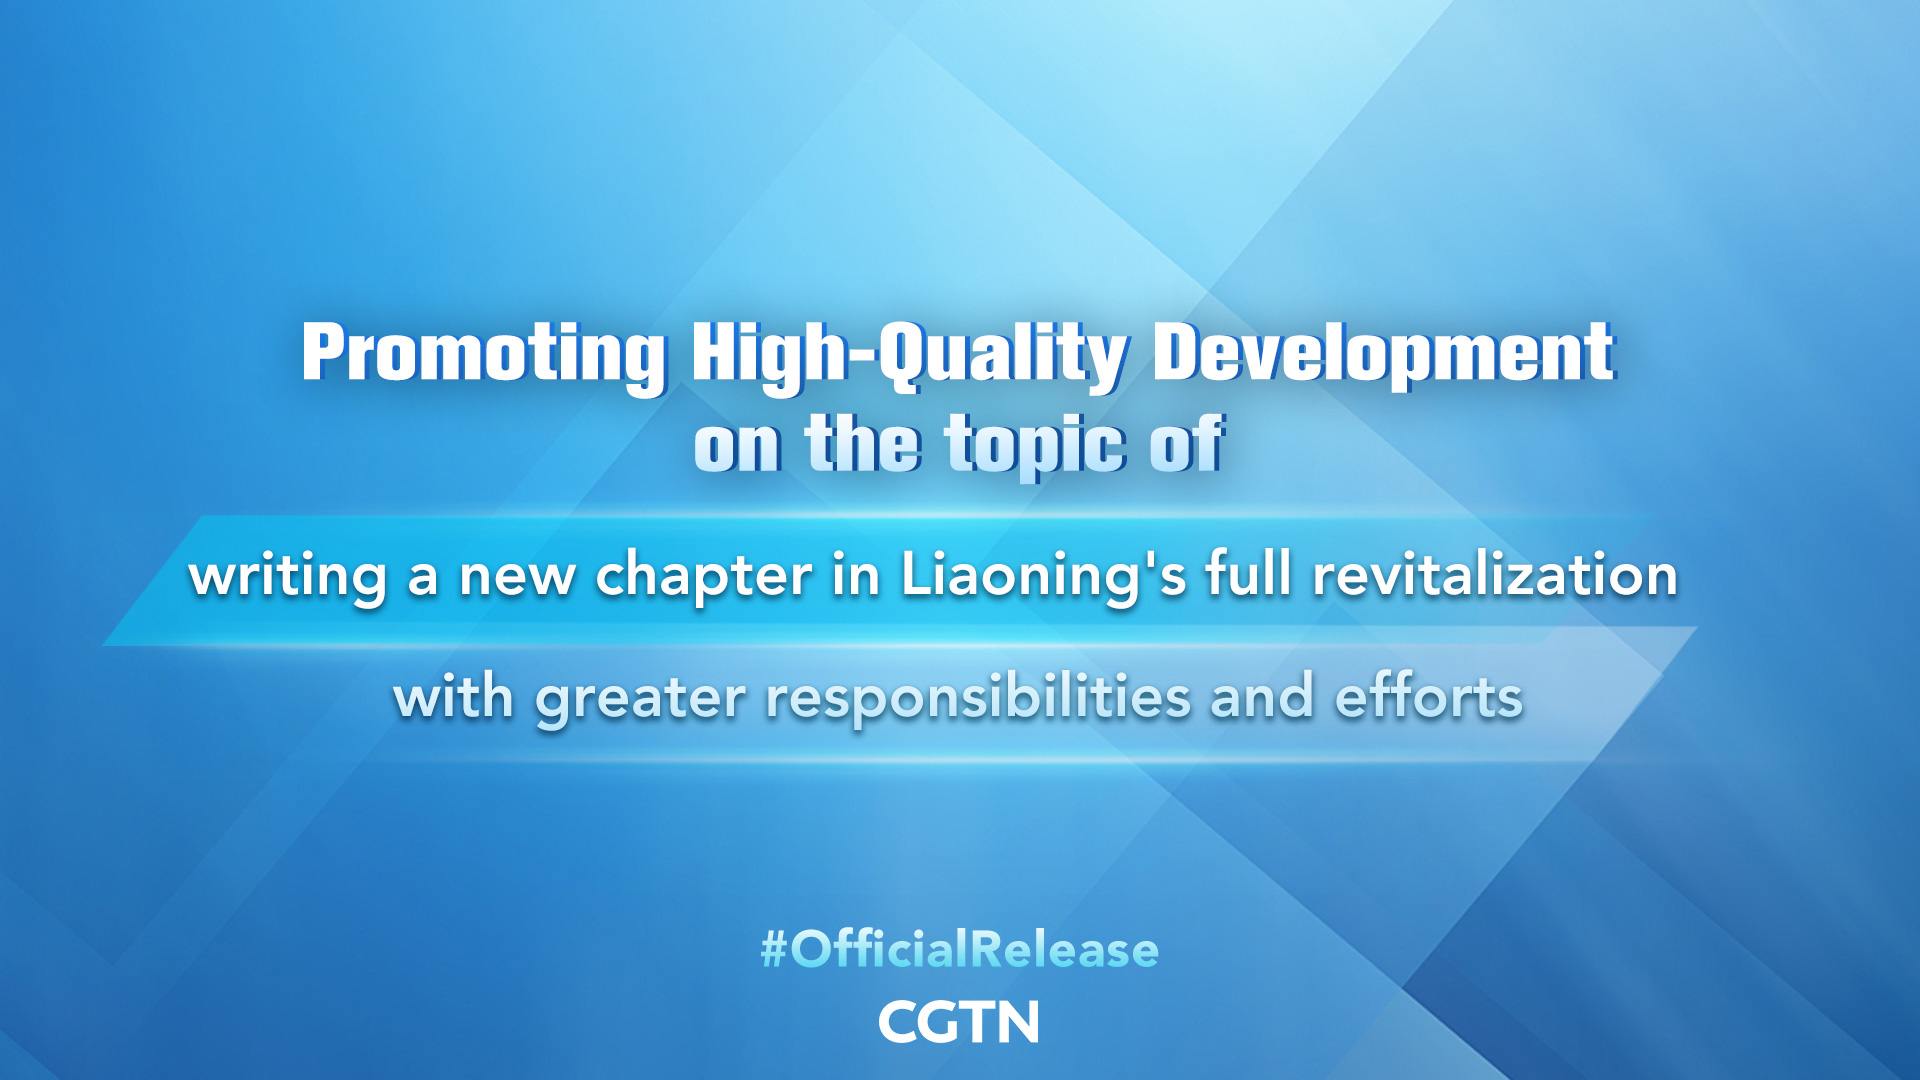 Live: Presser on promoting high-quality development in Liaoning